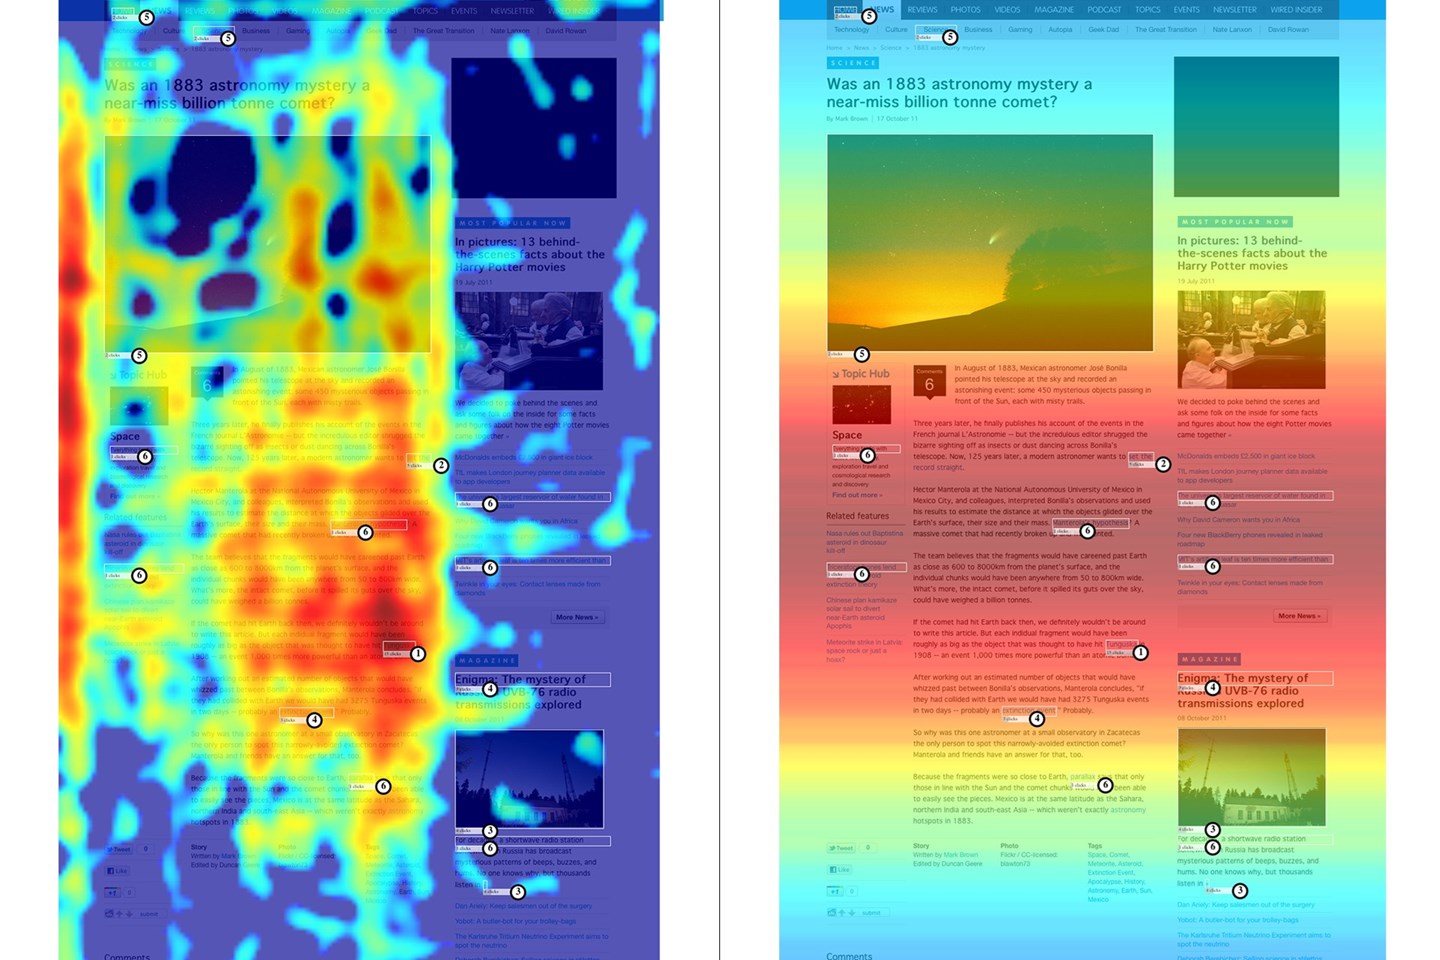 Heatmaps from Wired research